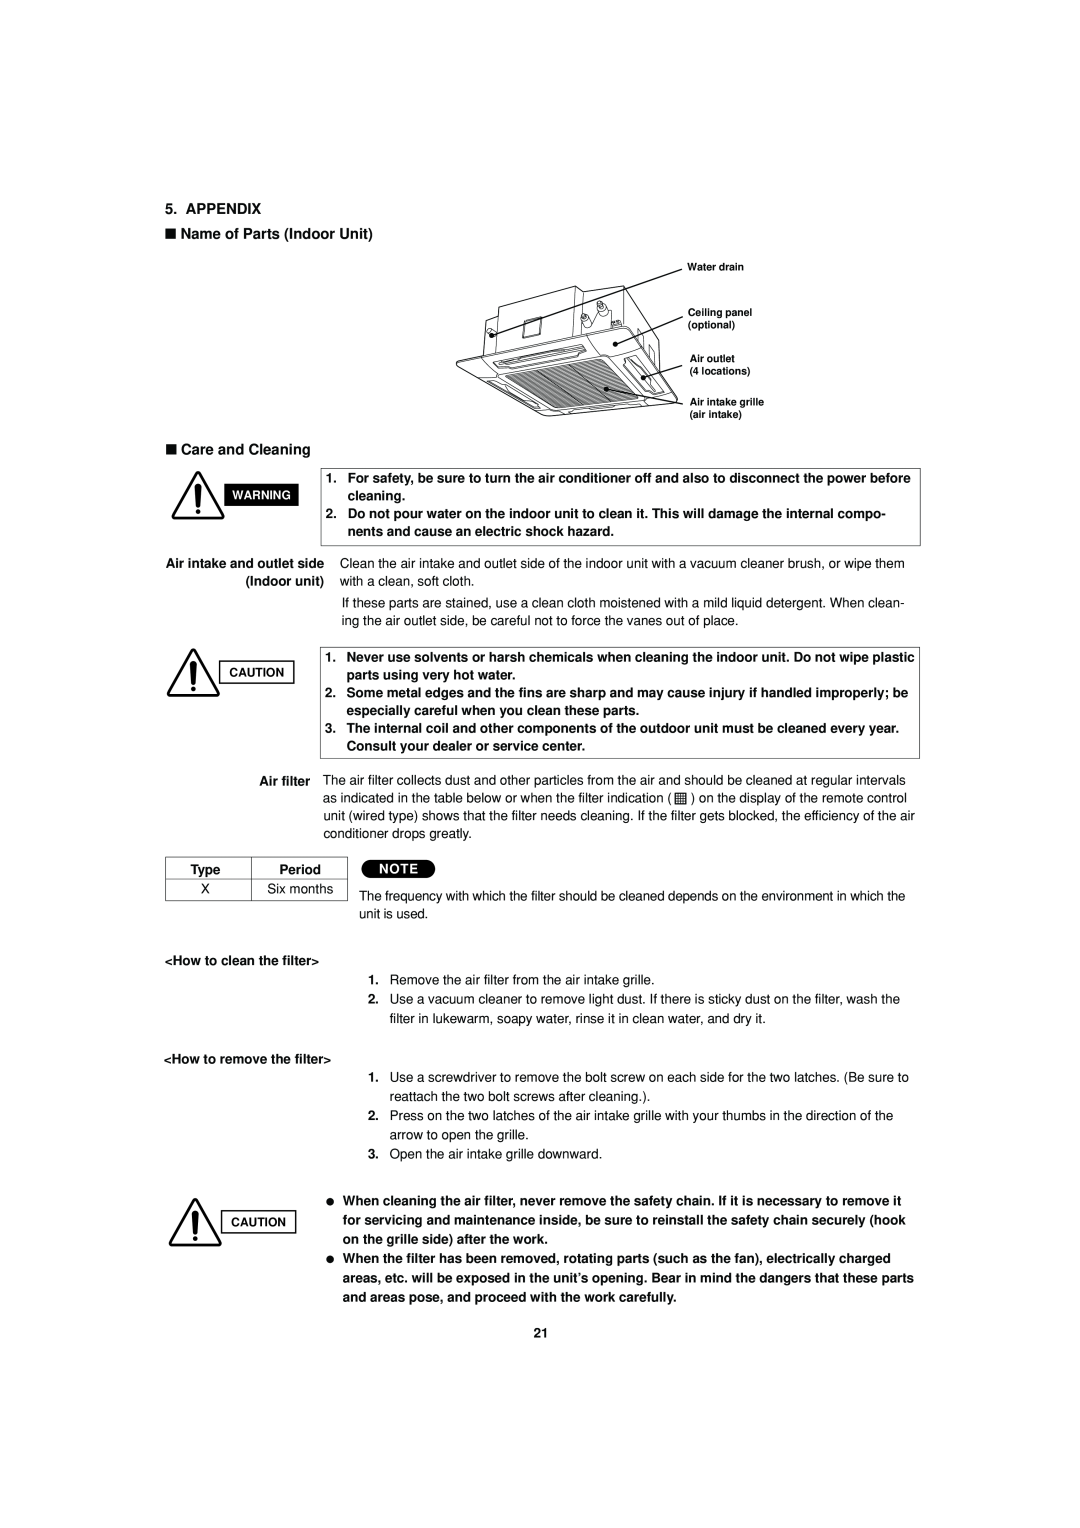 Sanyo SPW-XR254EH56 operation manual APPENDIX Name of Parts Indoor Unit, Care and Cleaning 